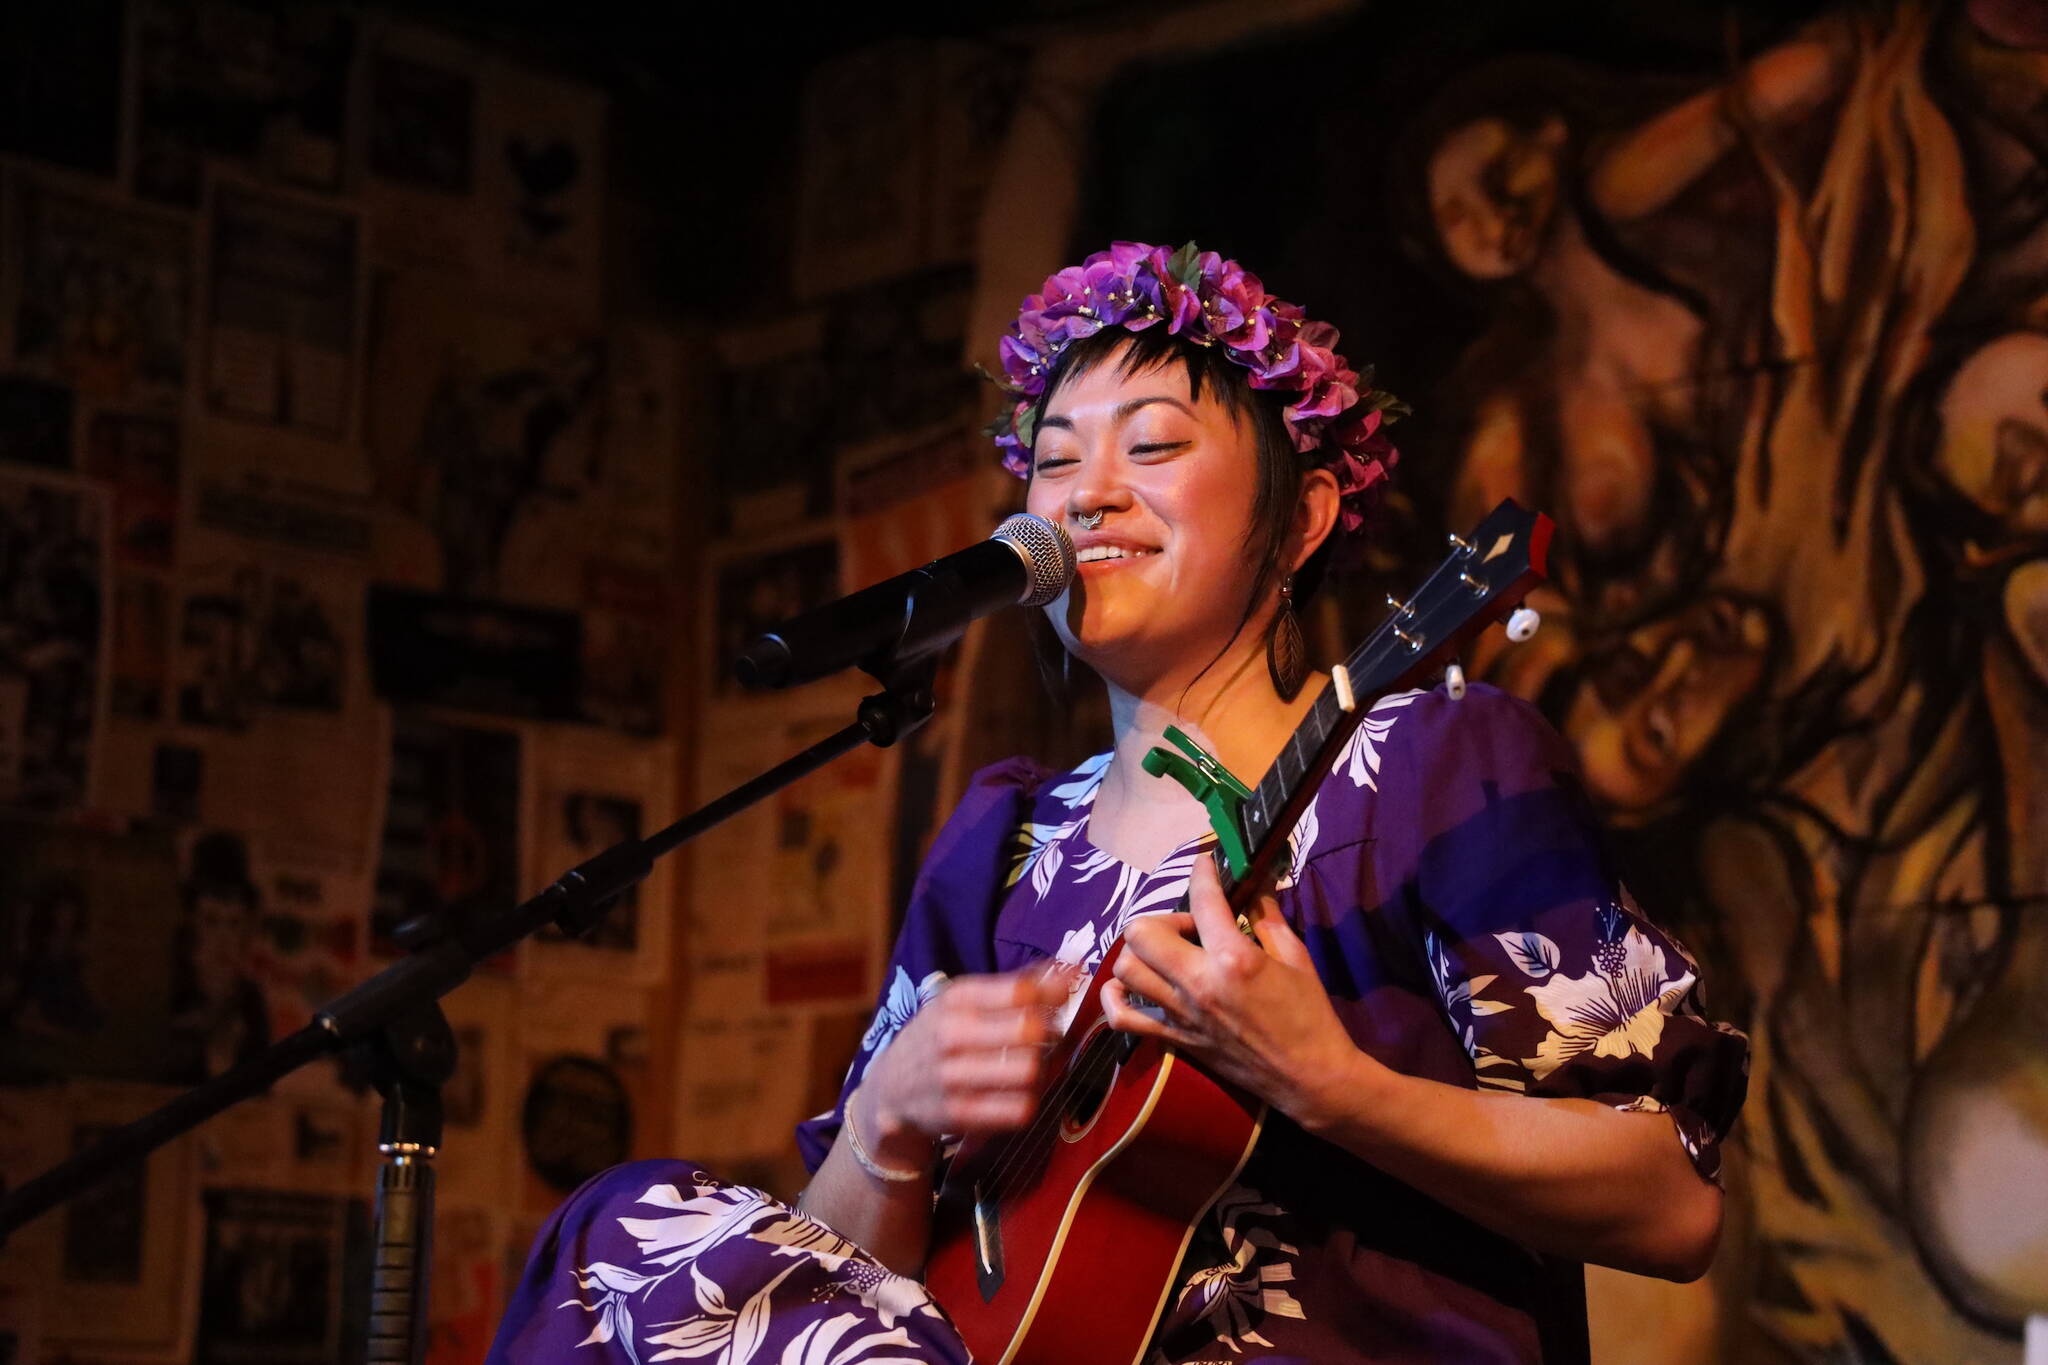 Photos by Clarise Larson / Juneau Empire 
Lisa Puananimôhala’ikalani Denny sings while on stage at the Alaskan Hotel and Bar during the Alaska Folk Festival side-stage event “Unceded” Tuesday evening. Below, Lester Joel Rodriguez also performed during the event.